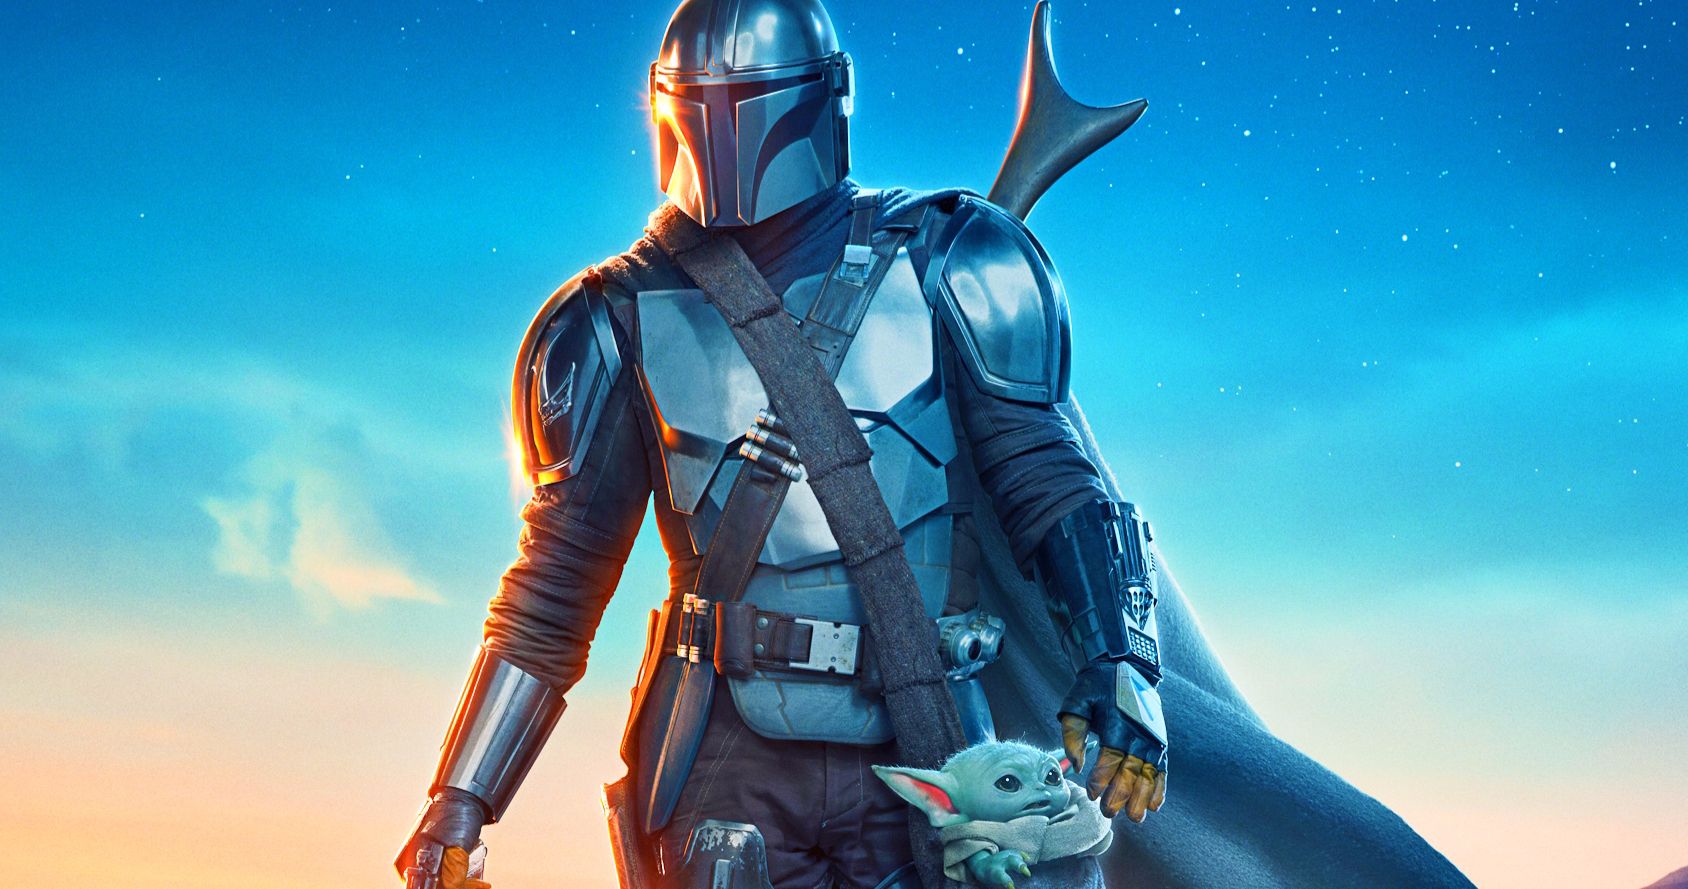 The Mandalorian Season 2 Poster Flies in Alongside a Ton of New Images